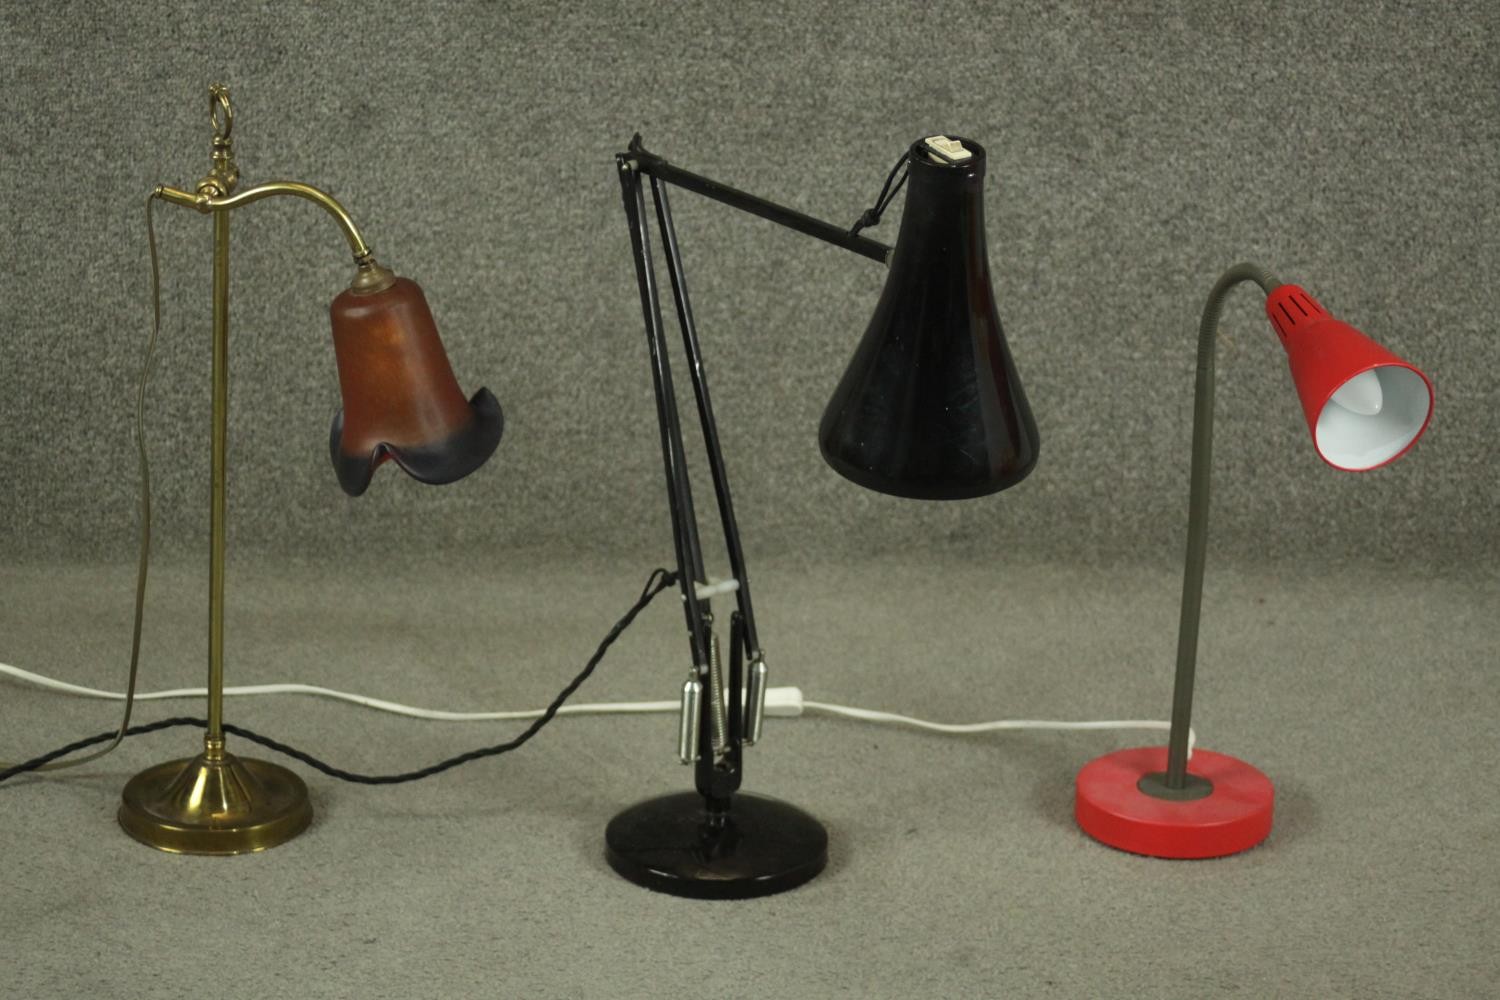 A Herbert Terry style black Anglepoise desk lamp, together with a mid to late 20th century red